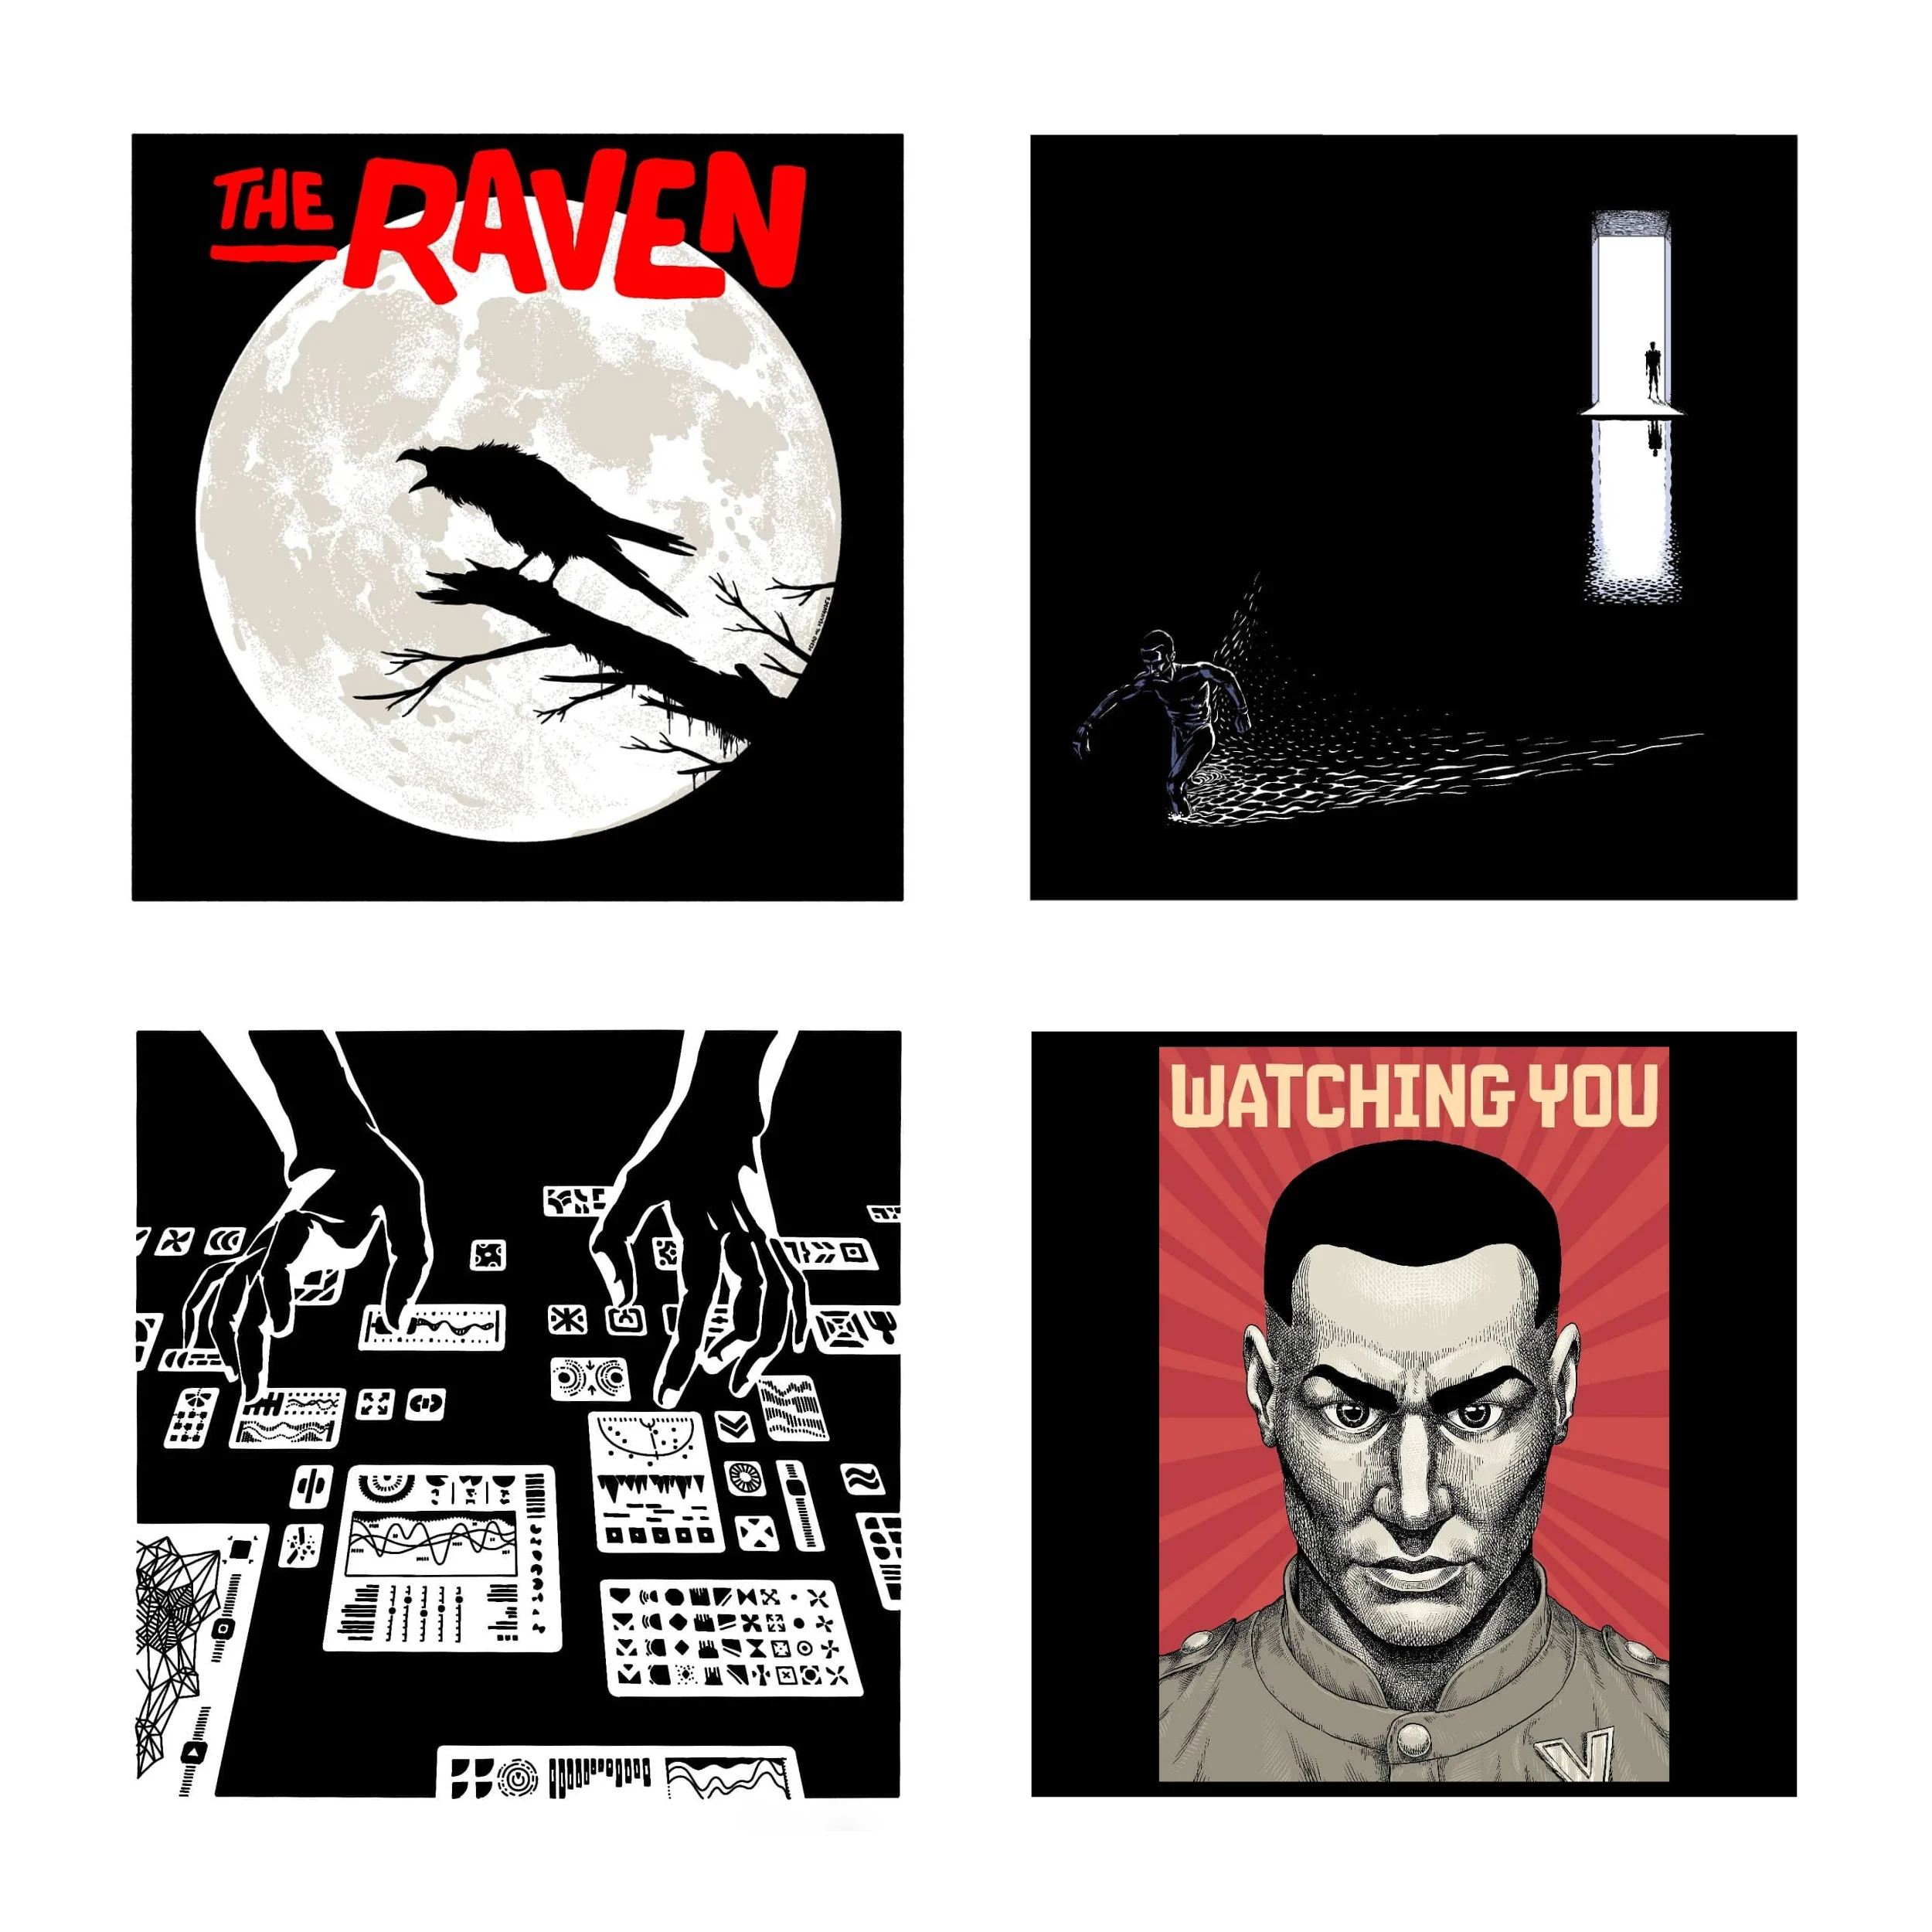 A selection of 4 illustrations that look like a book cover or movie poster: a raven before the moon; a man in escape on a dark room filled with water; a pair of hands manipulating a futuristic dashboard; and a portrait of an intimidating man with the title 'Watching You.'